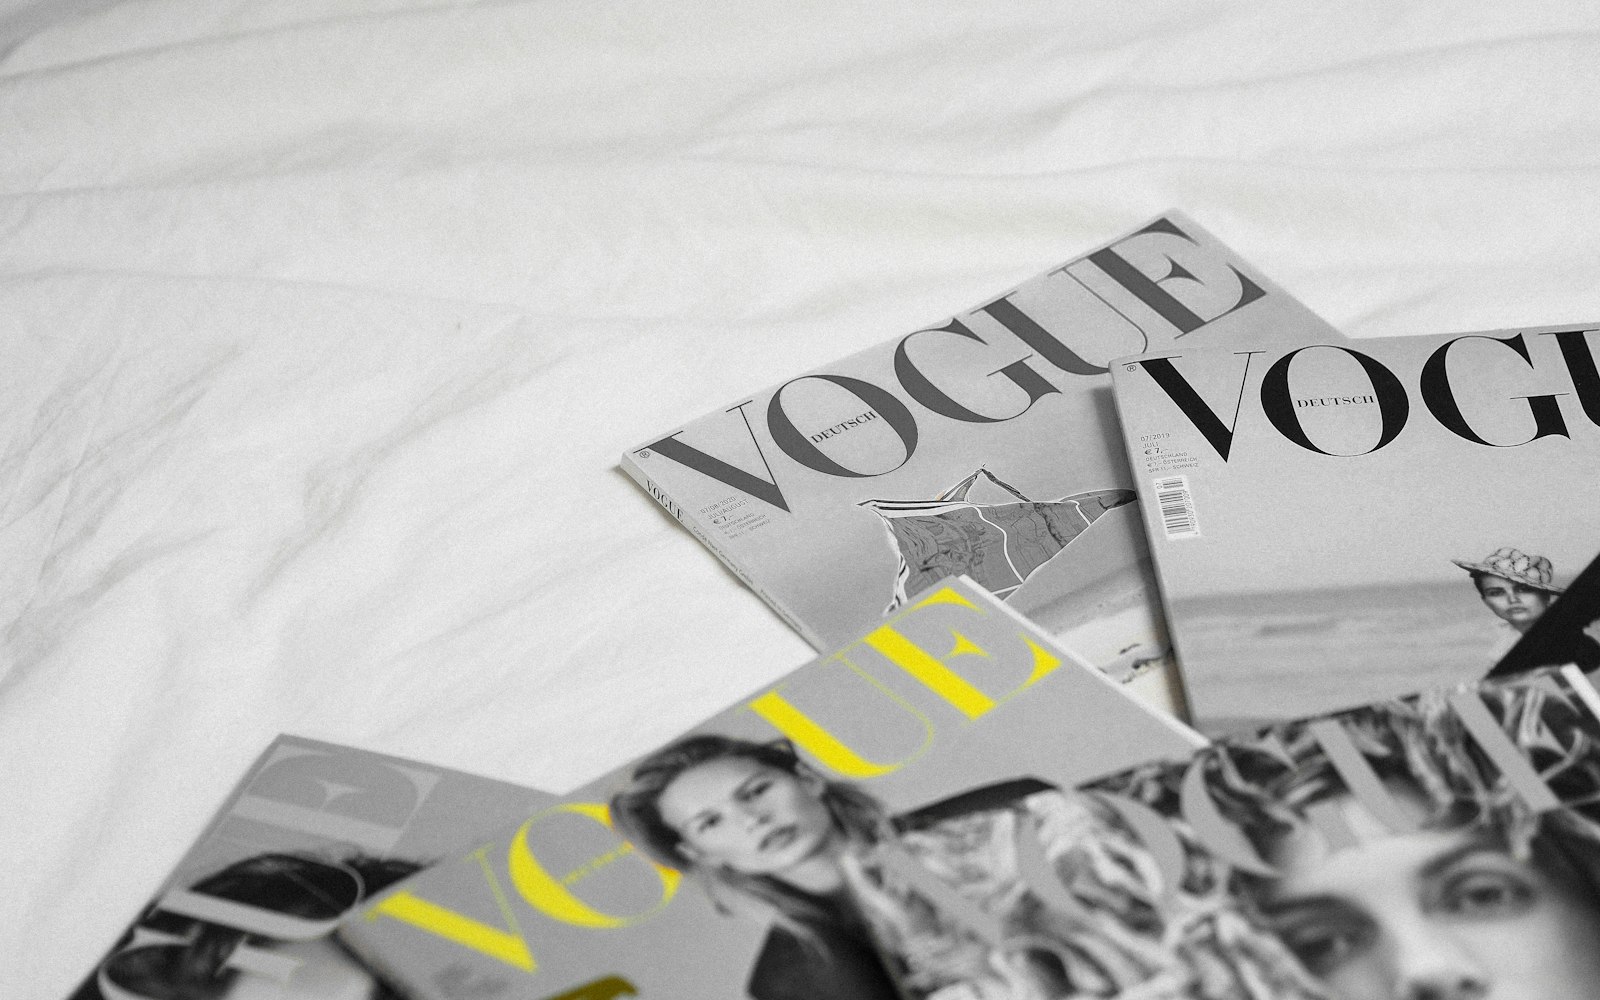 Everything You Need To Know About Vogue World: Lonon